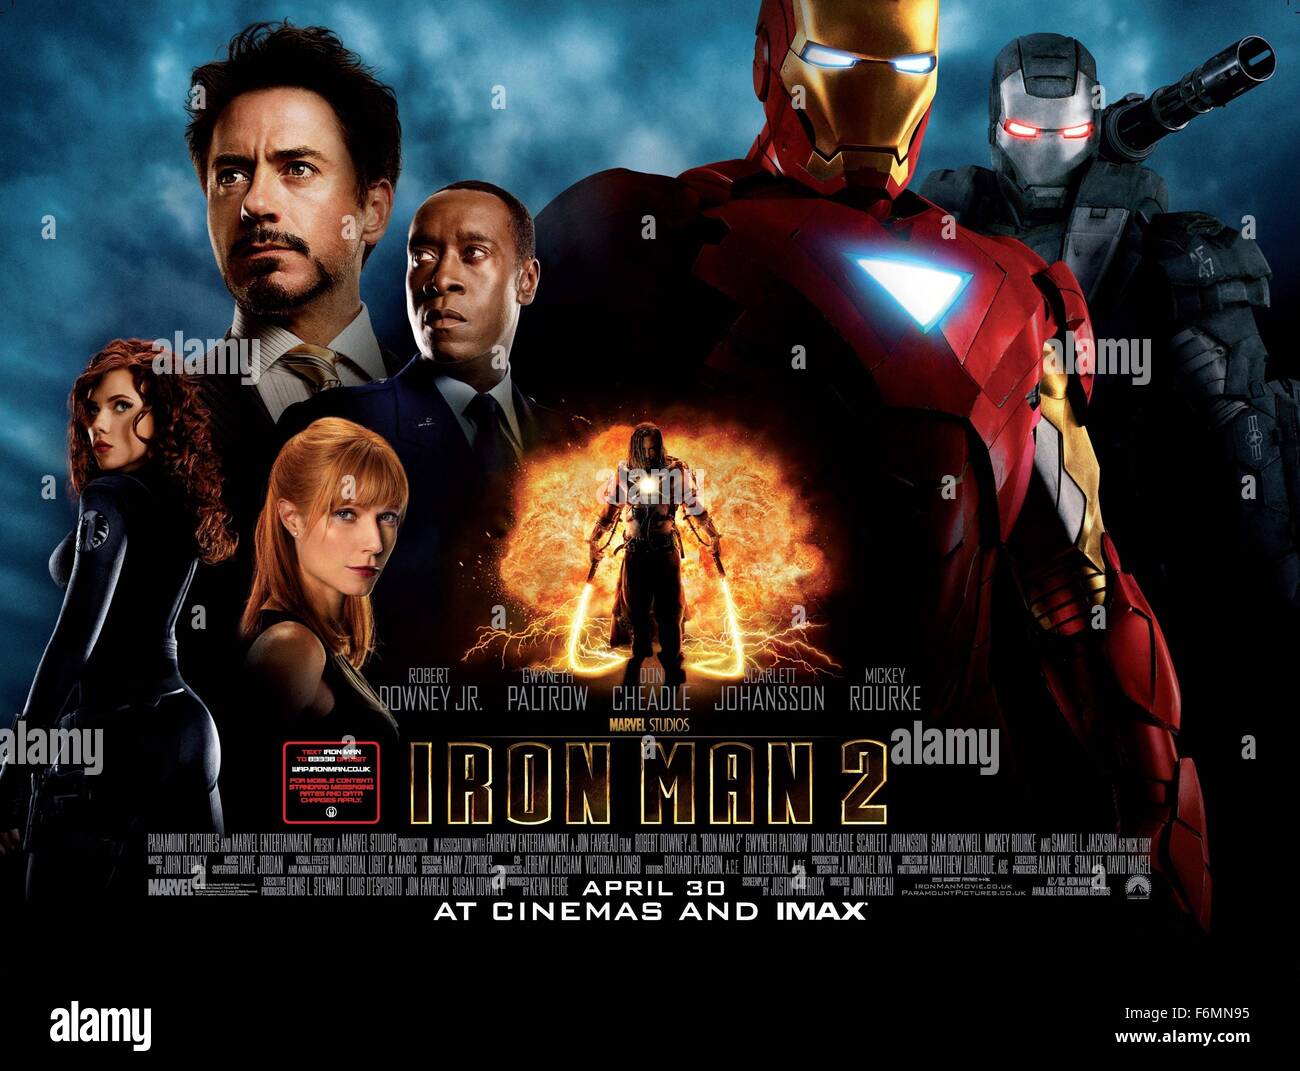 RELEASE DATE: May 7, 2010   MOVIE TITLE: Iron Man 2   STUDIO: Paramount Pictures   DIRECTOR: Jon Favreau  PLOT: Billionaire Tony Stark must contend with deadly issues involving the government, his own friends, as well as new enemies due to his superhero alter ego Iron Man   PICTURED: Movie poster   (Credit Image: c Paramount Pictures/Entertainment Pictures) Stock Photo